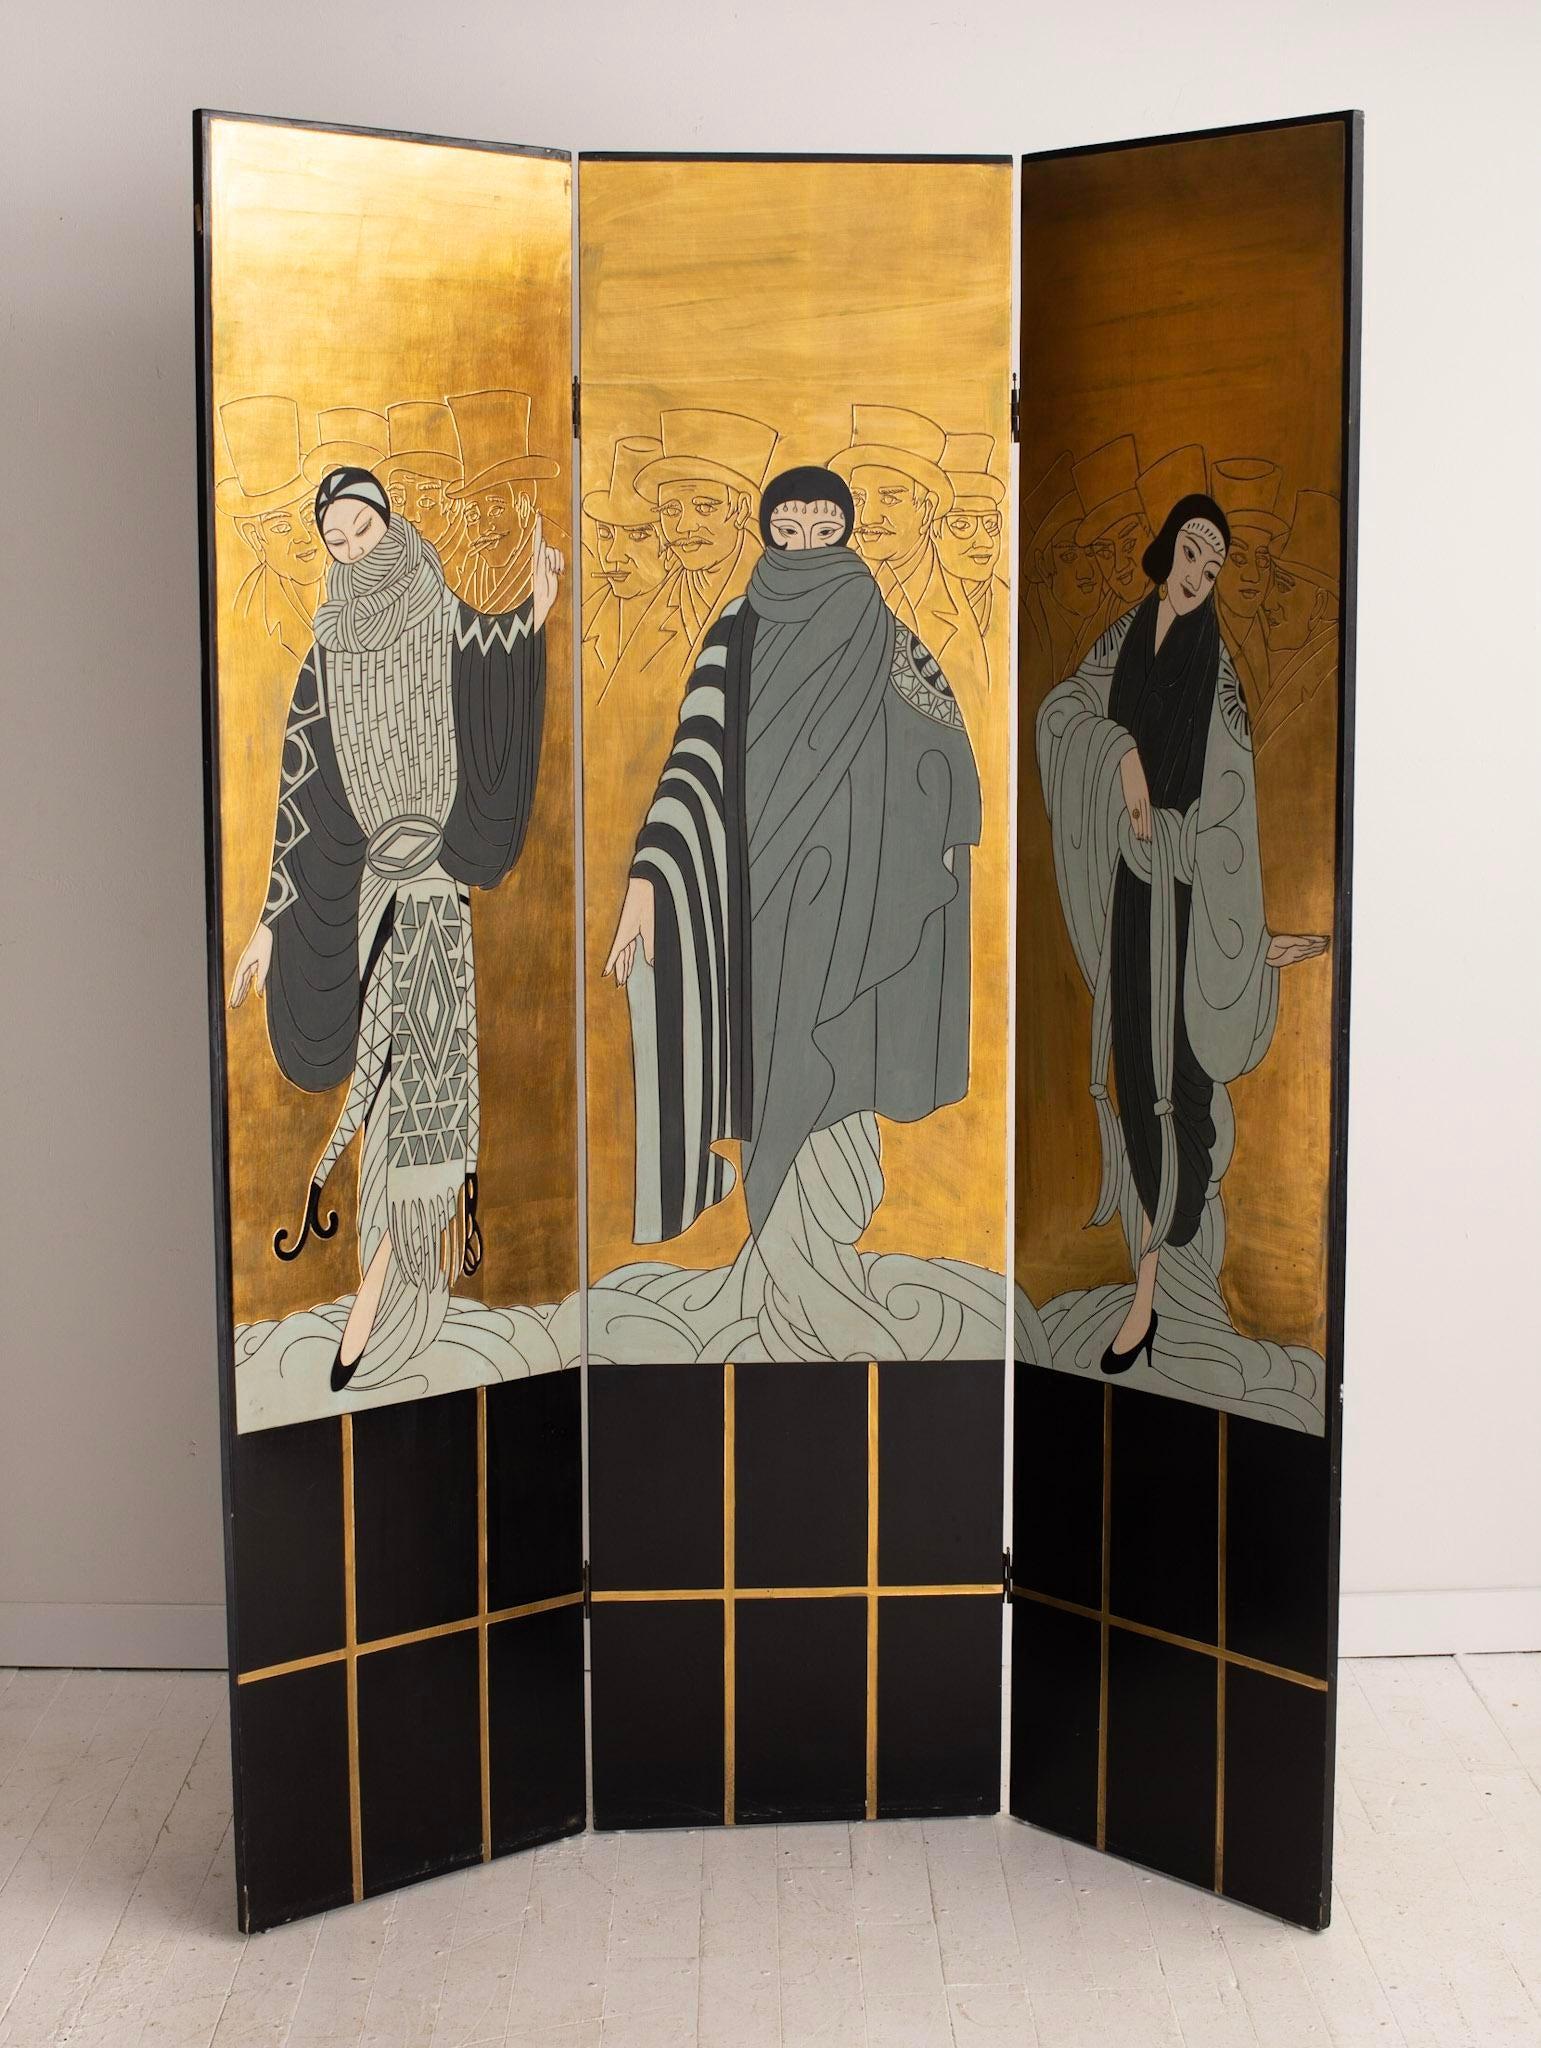 3 panel folding screen. Erté style Art Deco illustrations. Hinges bend in both directions for set up variations. Each individual panel is just over 20.25” wide.